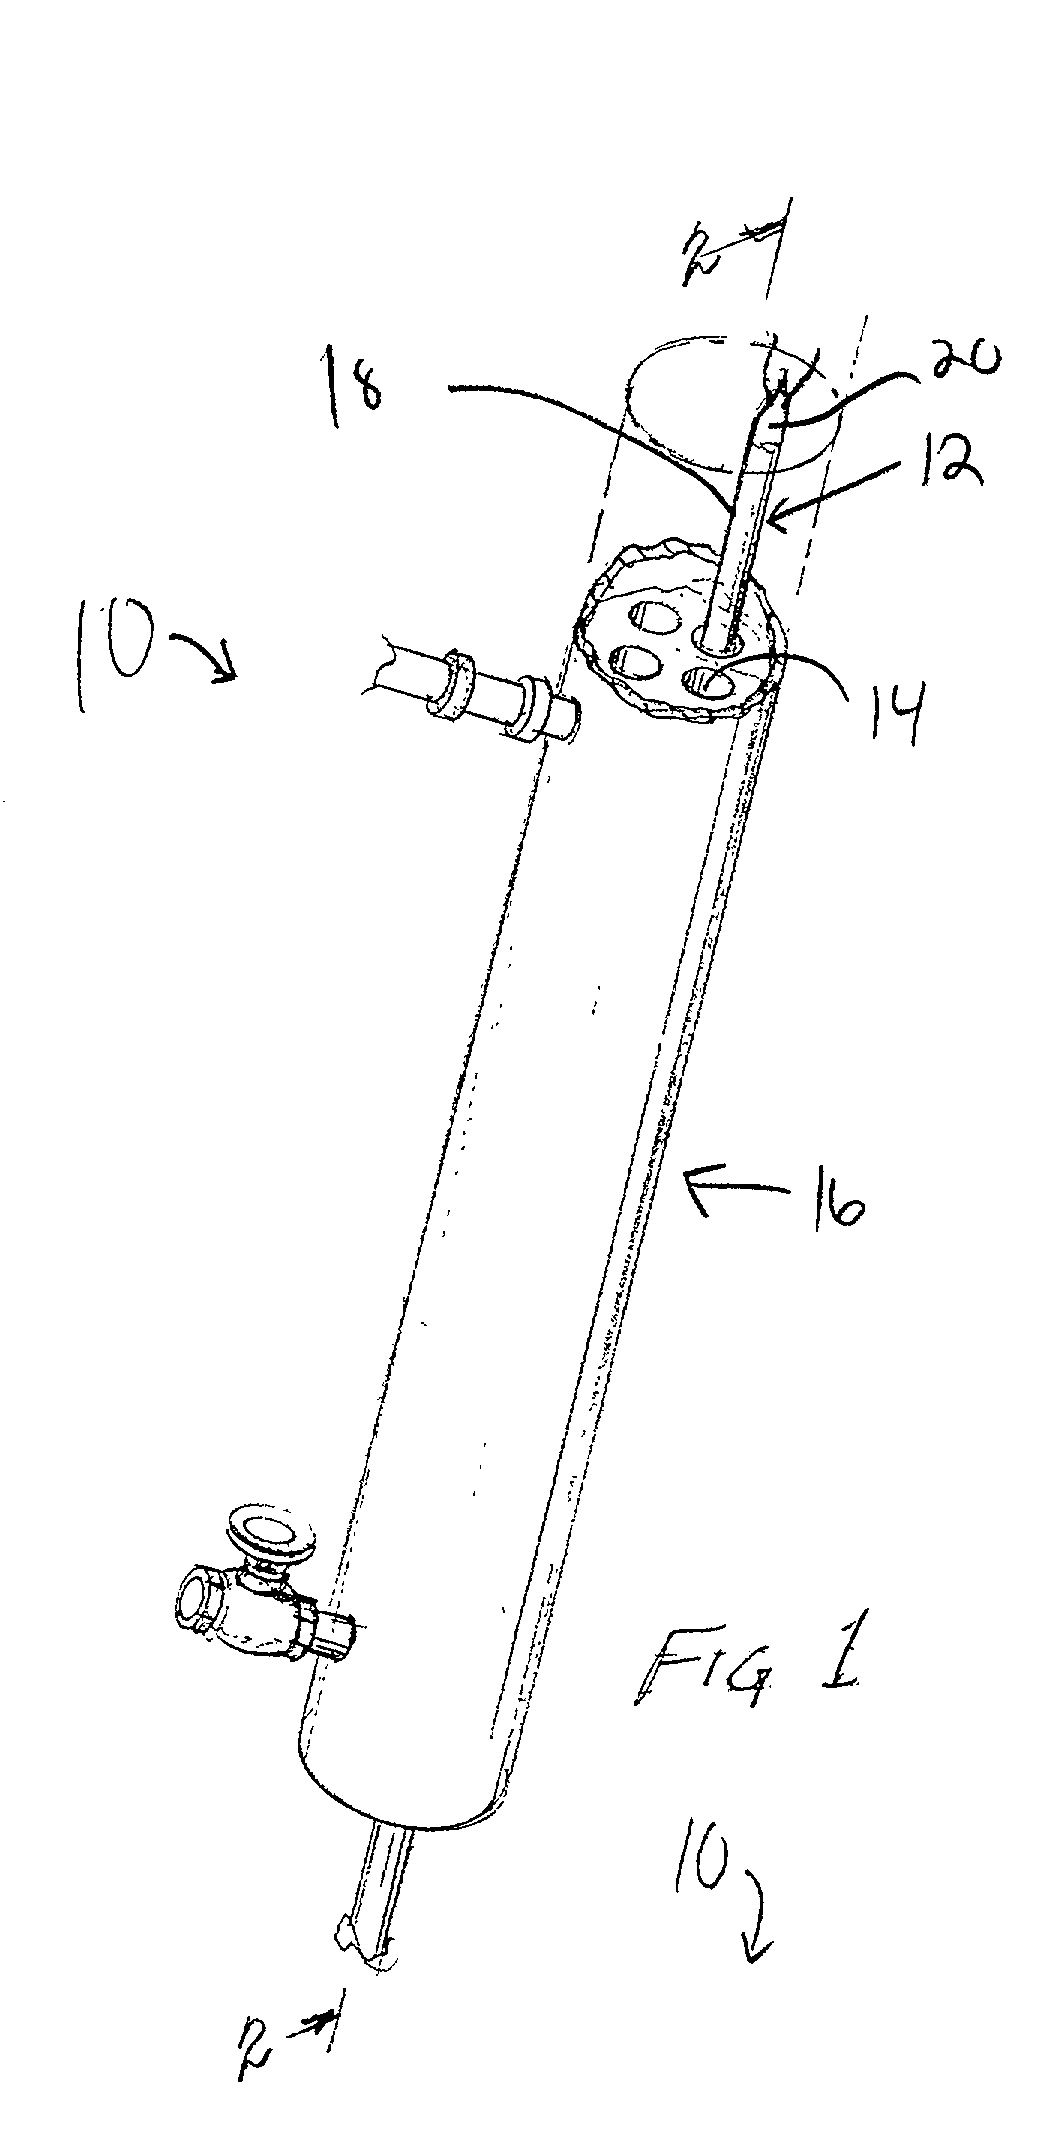 System and method for treating drinking water